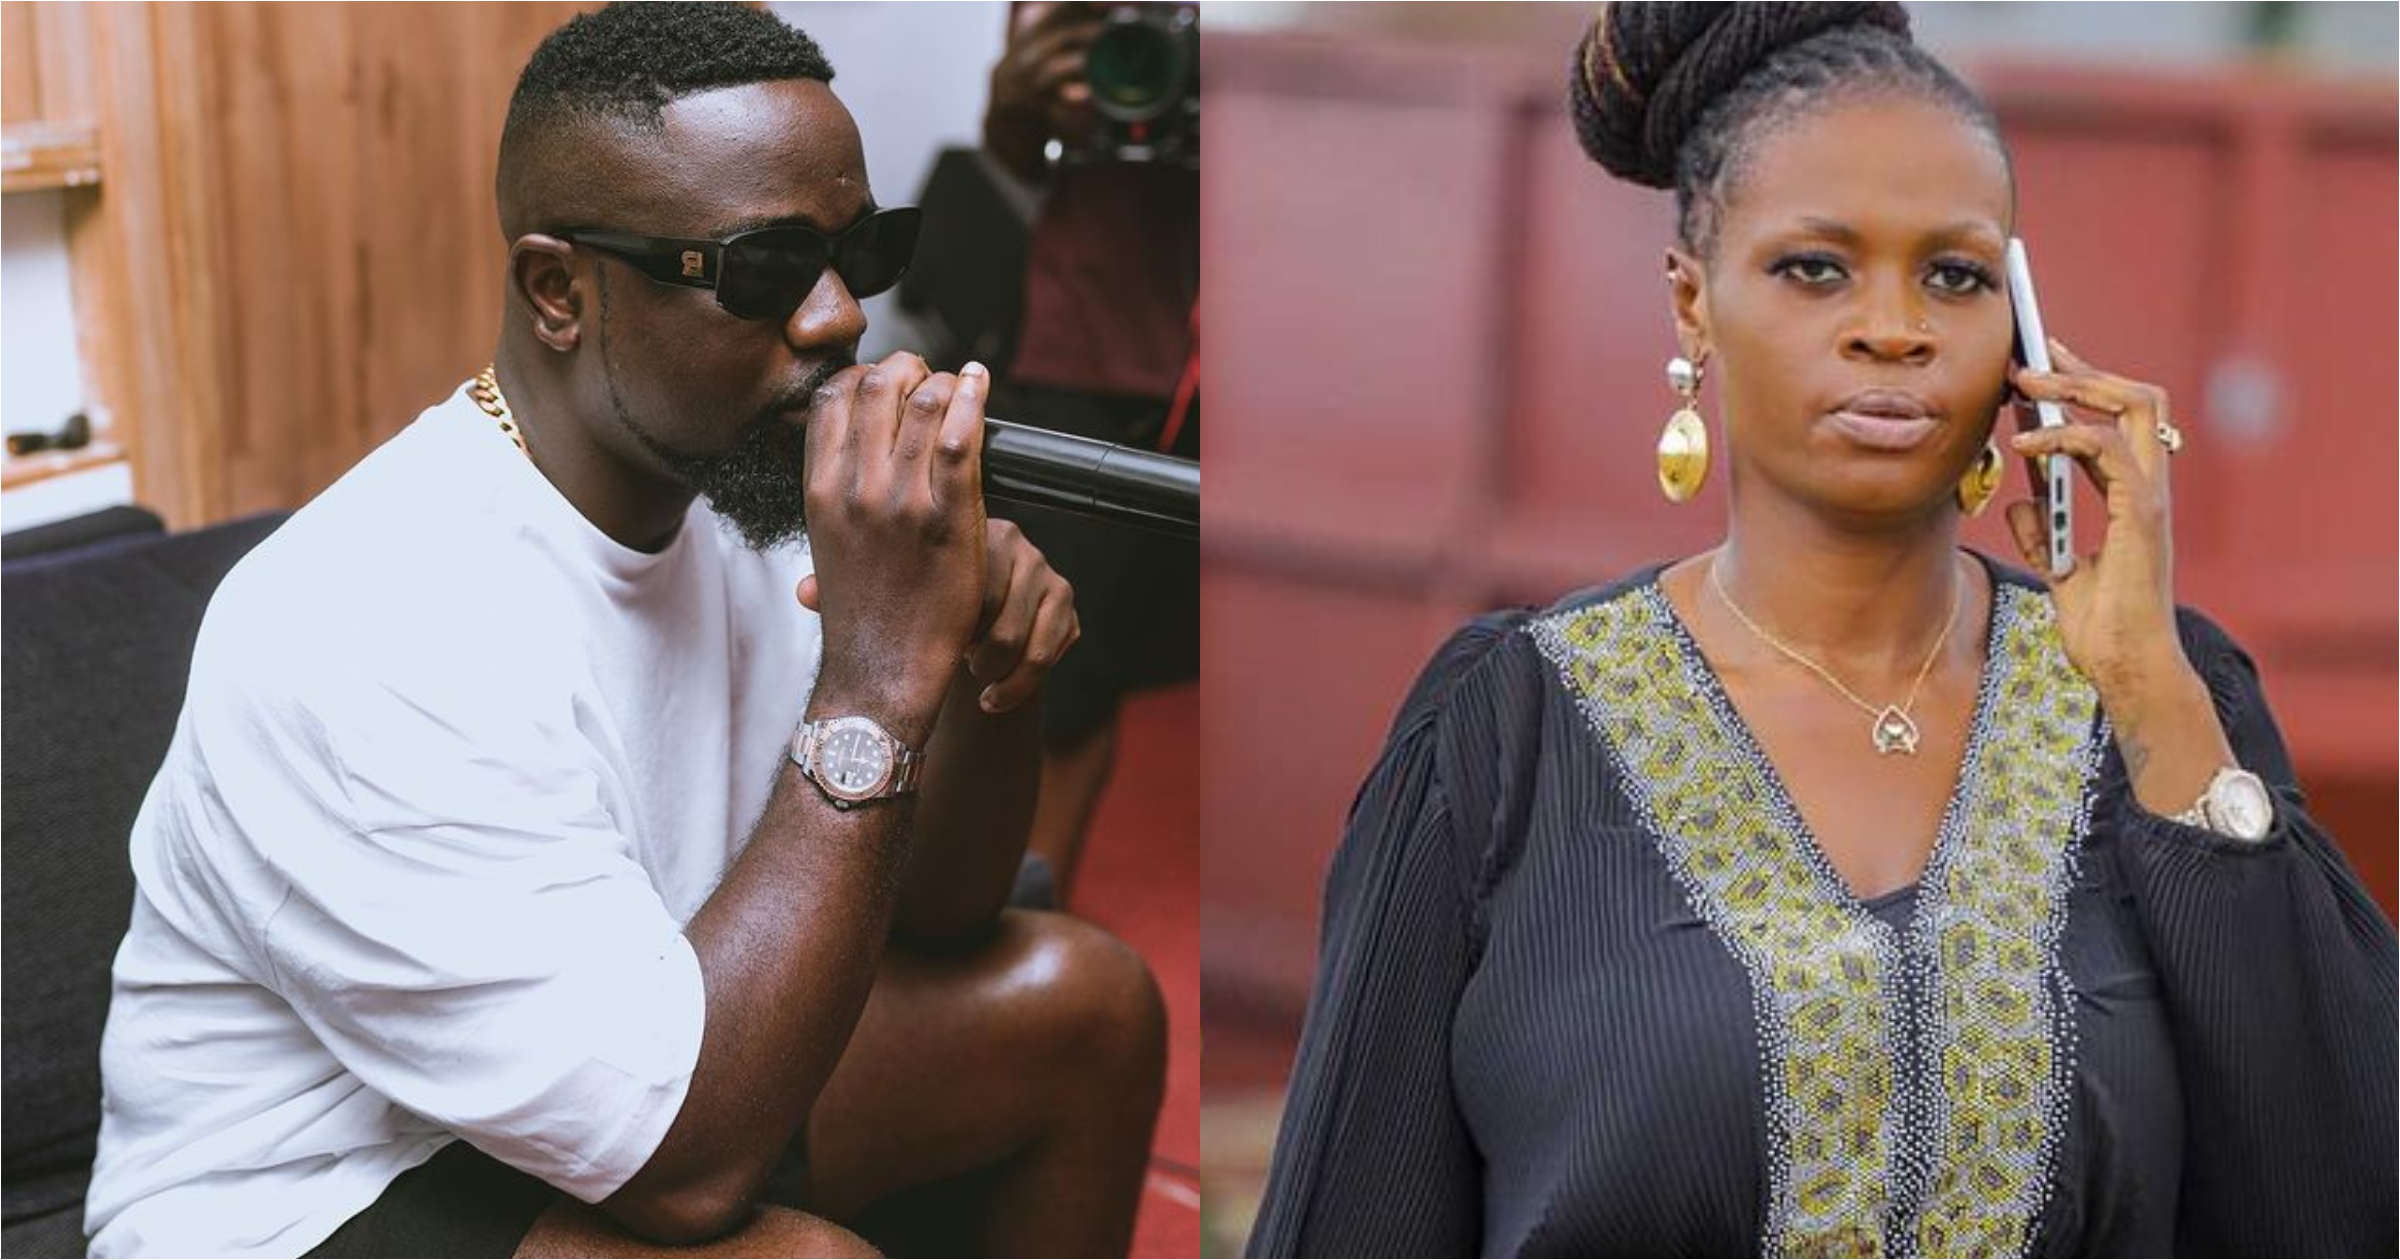 Sarkodie 'disses' Stonebwoy's friend Ayisha Modi in new song with Joey B (video)